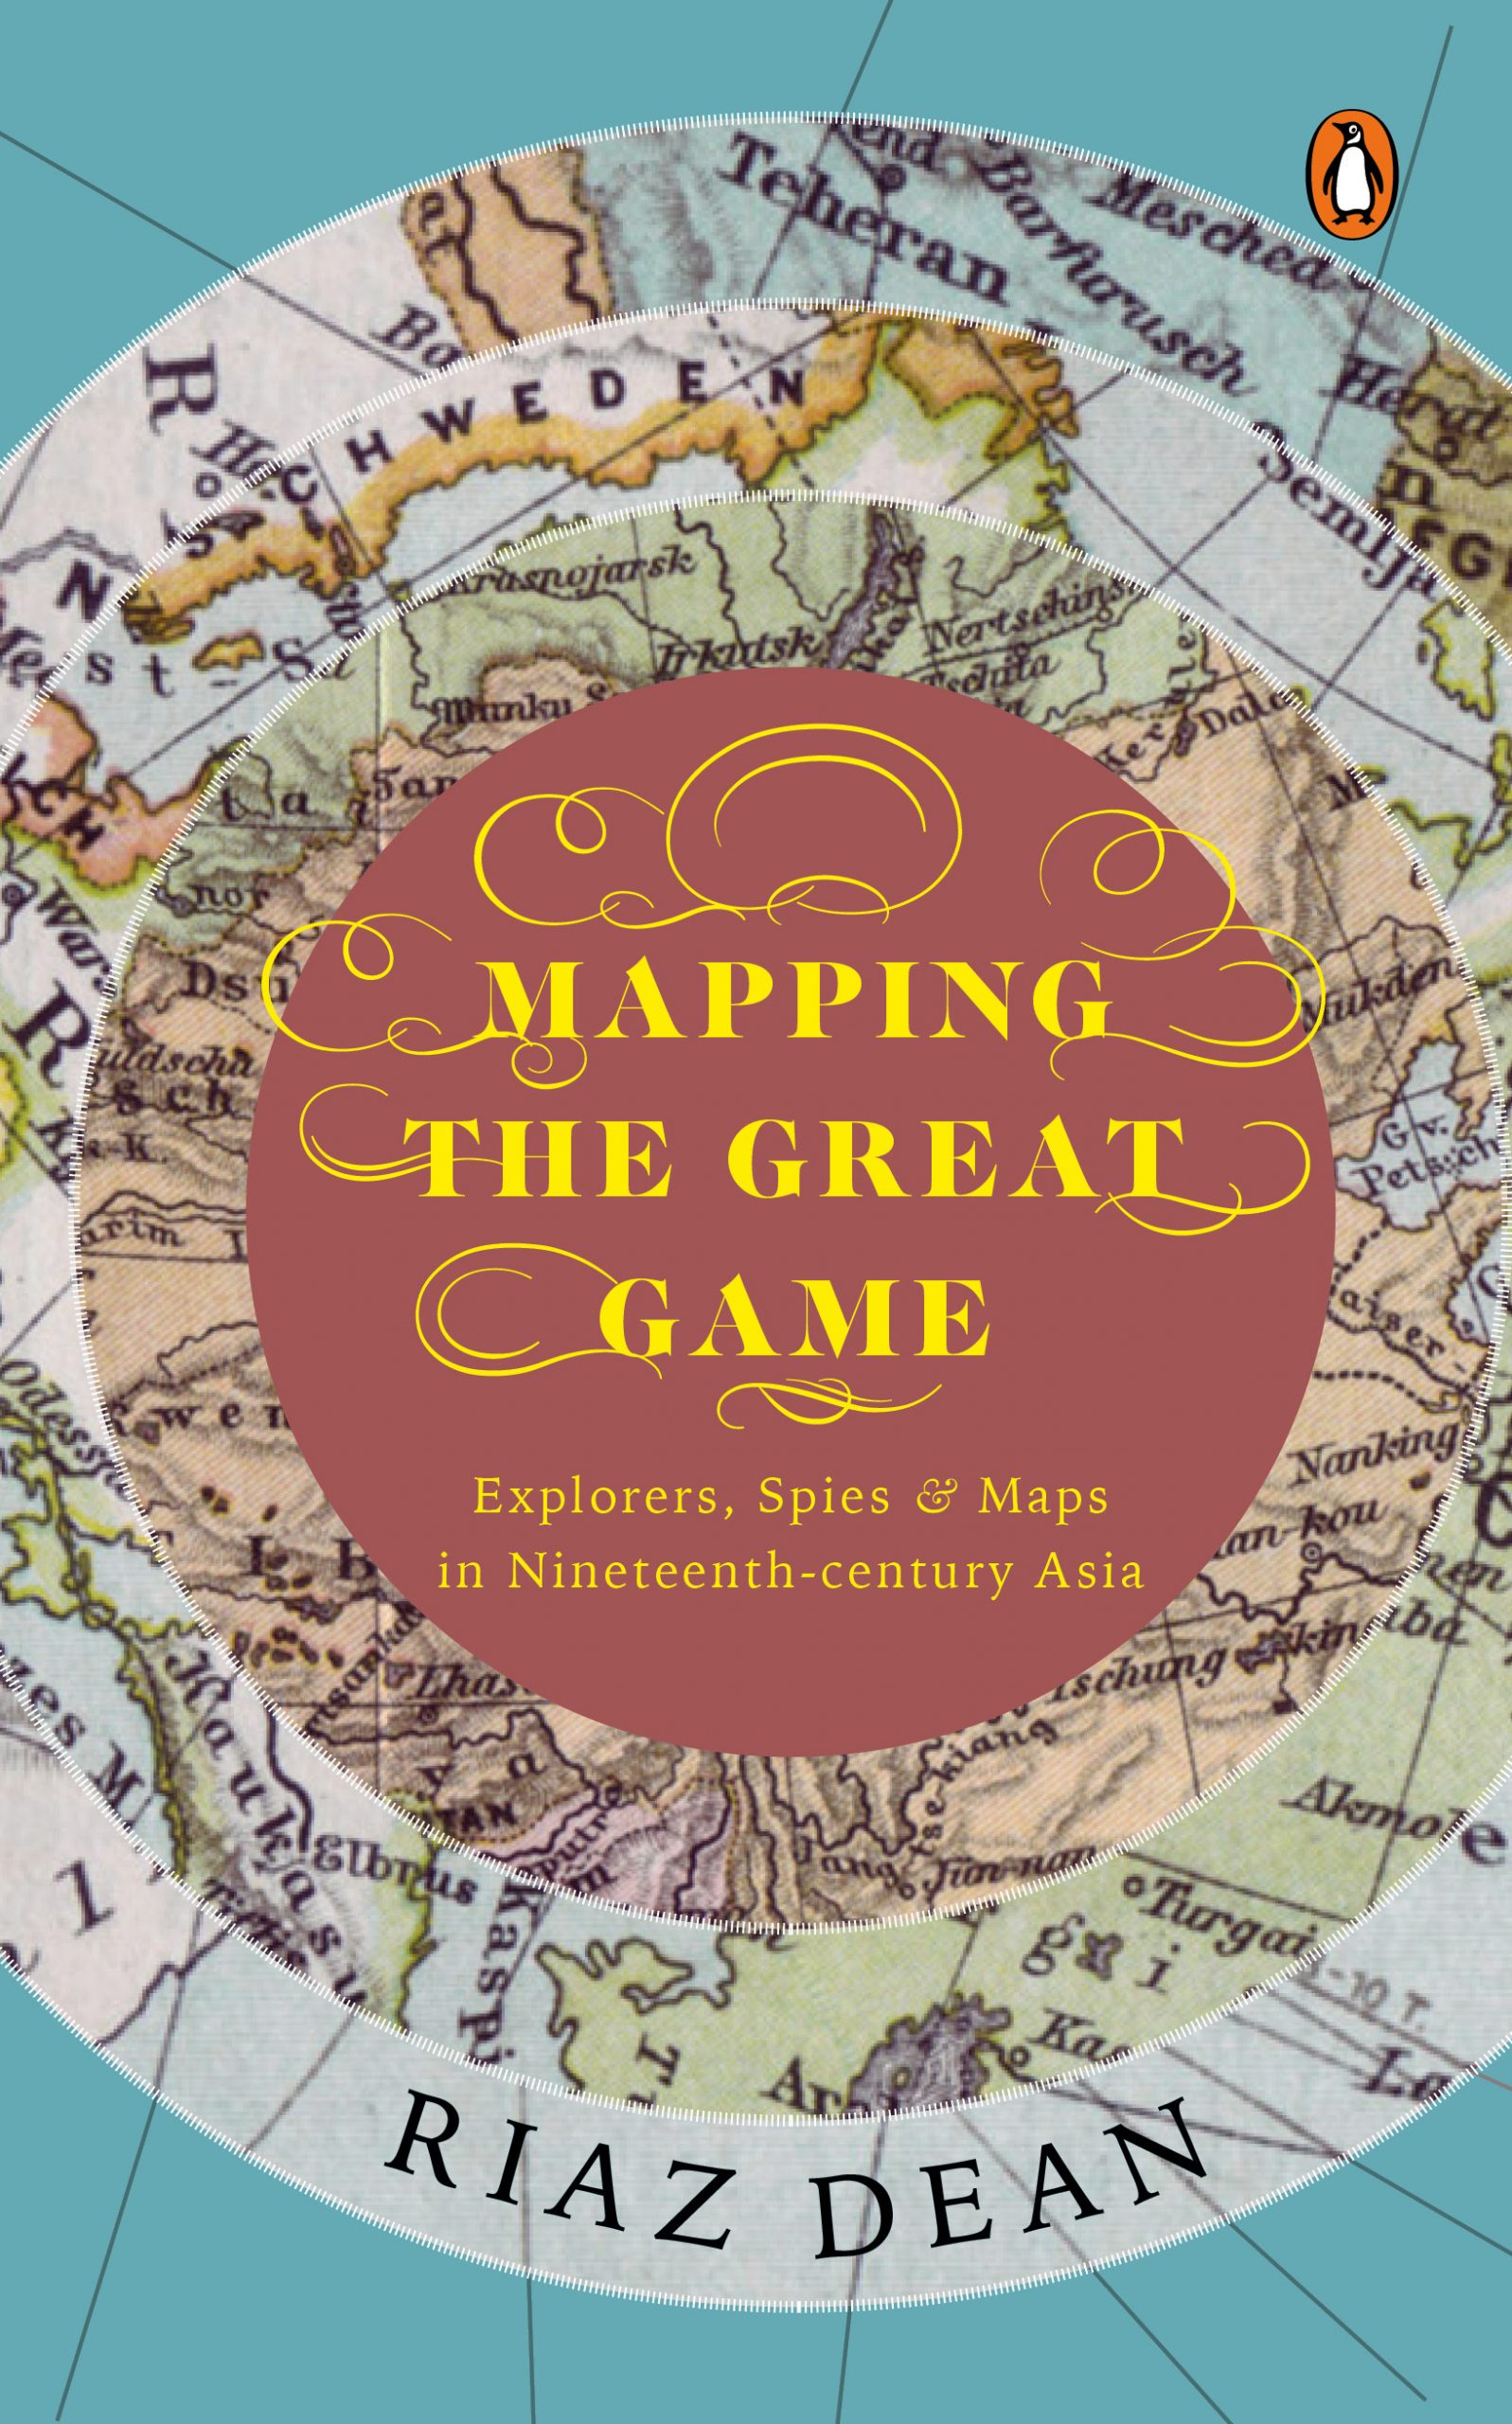 Mapping the Great Game: Explorers, Spies & Maps in Nineteenth-century Asia by Riaz Dean